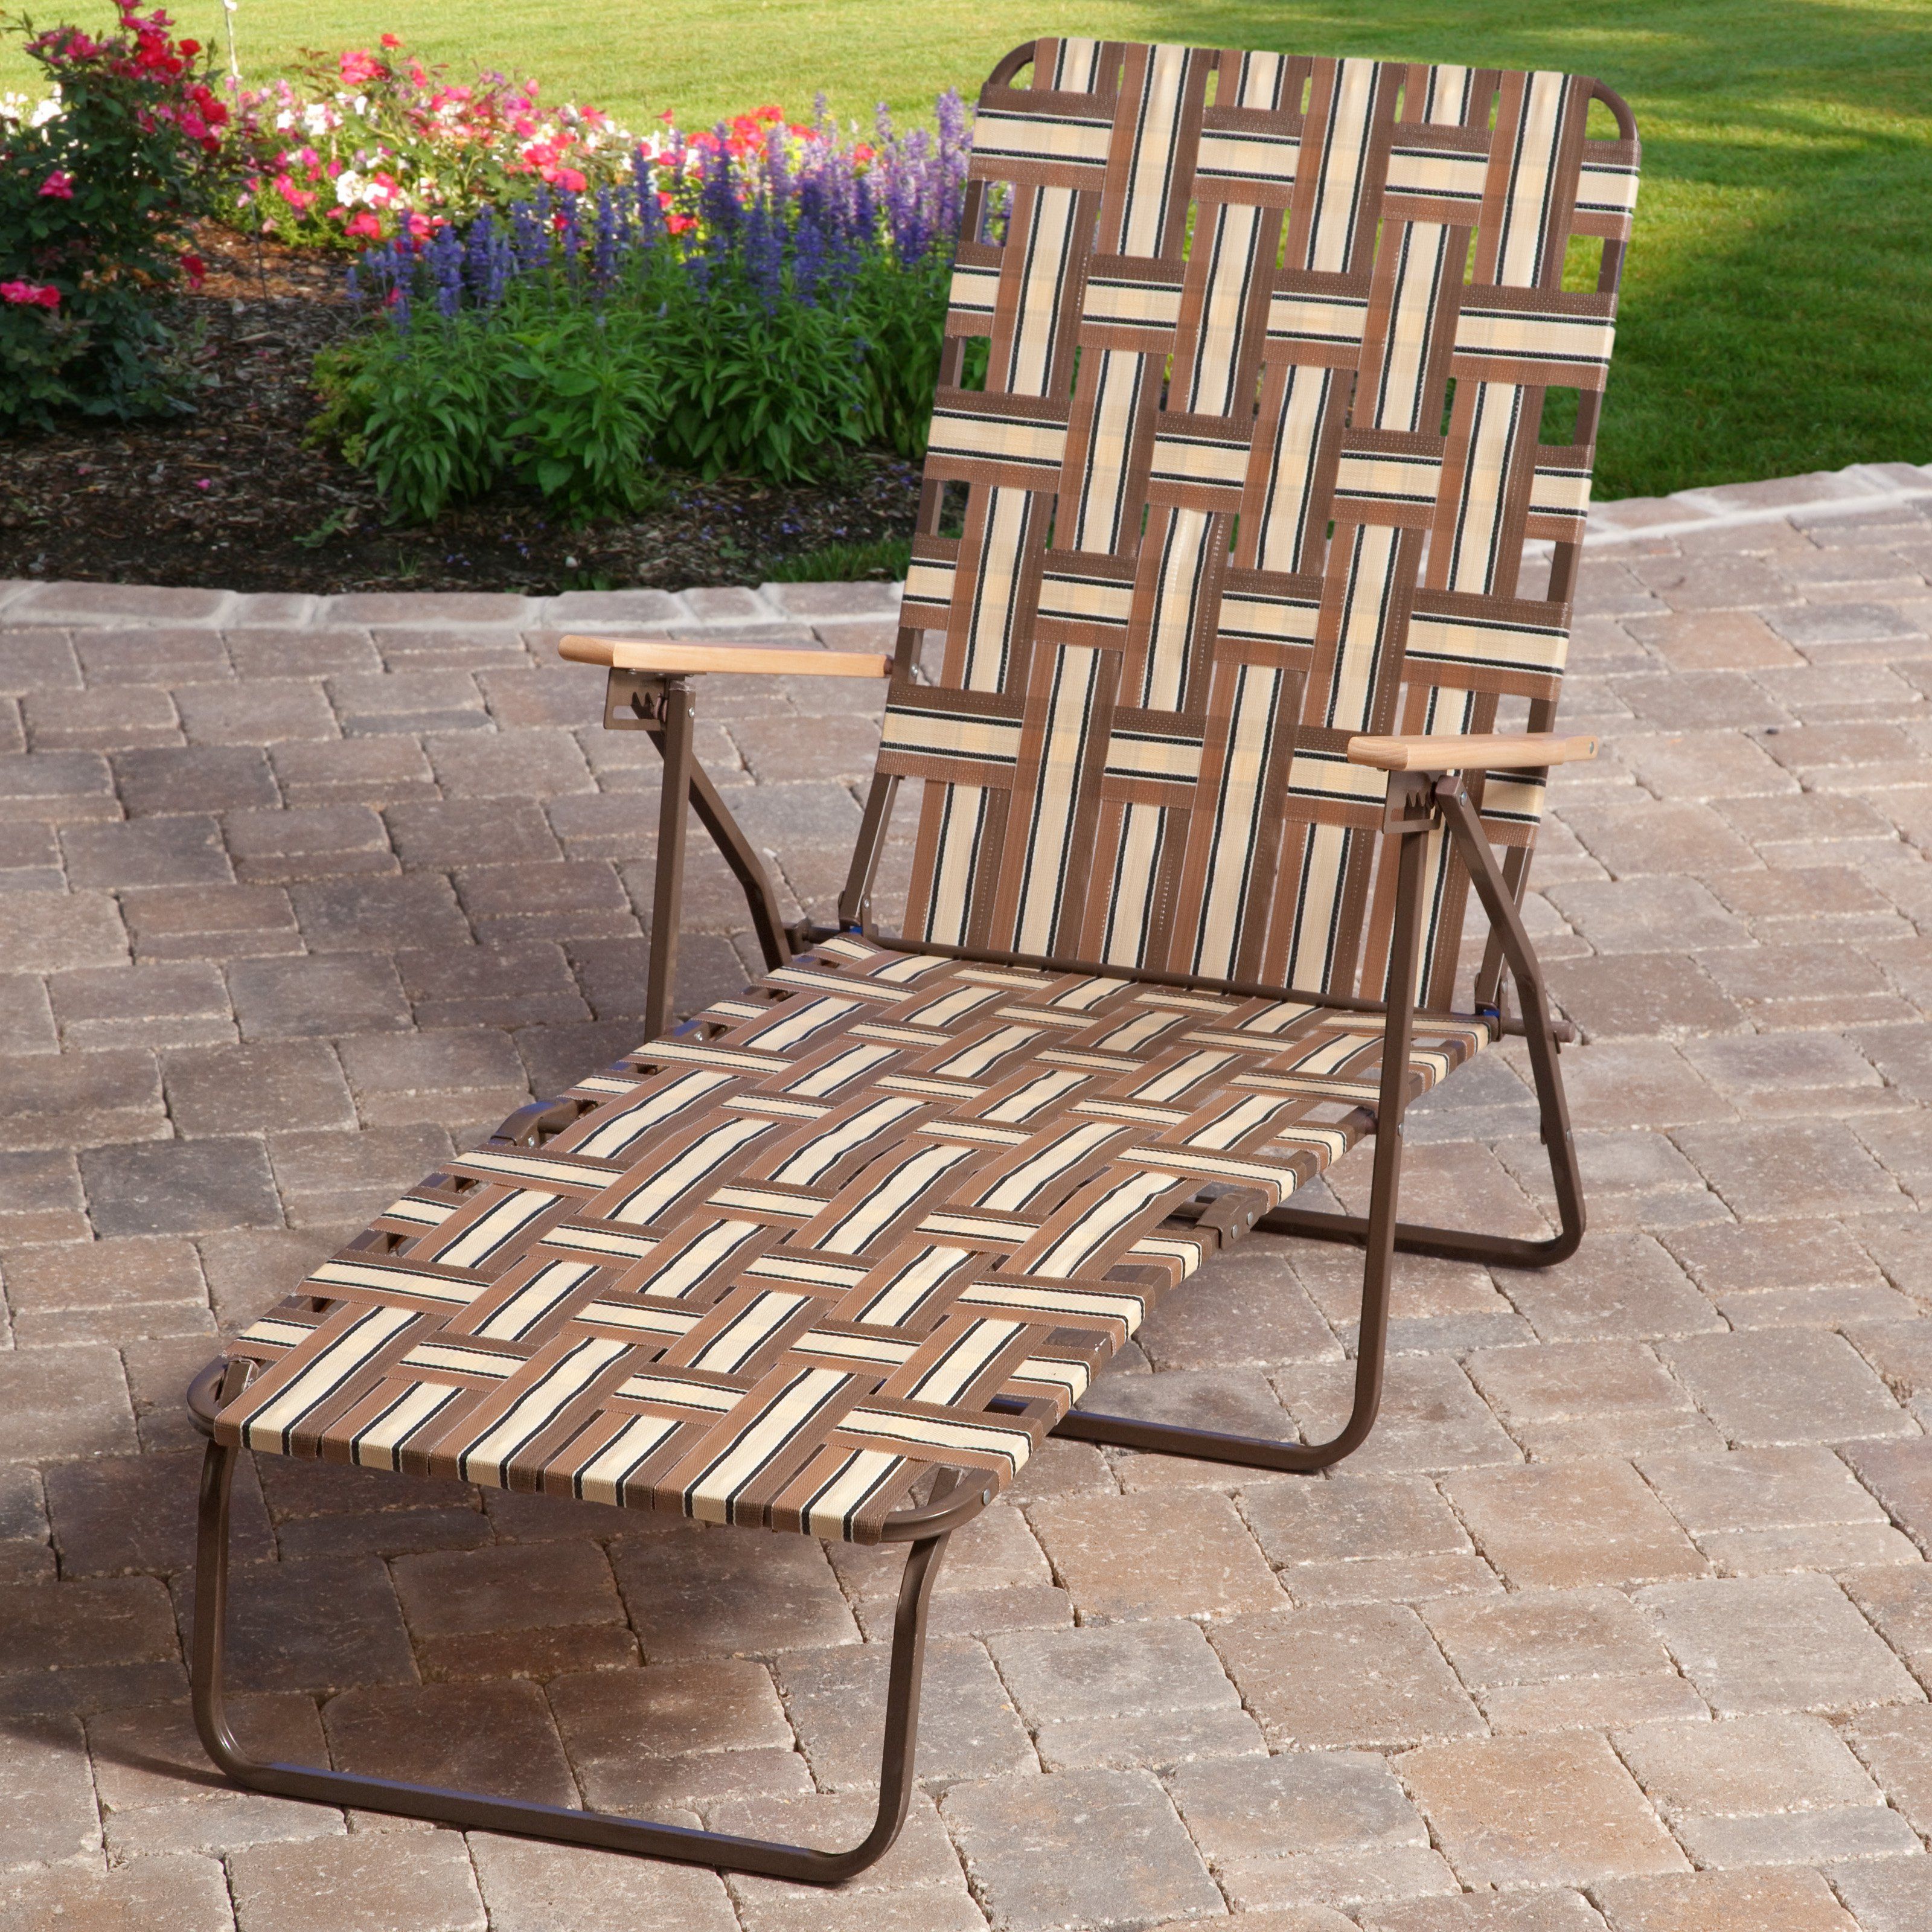 Rio Deluxe Folding Web Chaise Lounge – Walmart With Most Recently Released Brown Folding Patio Chaise Lounger Chairs (View 5 of 25)